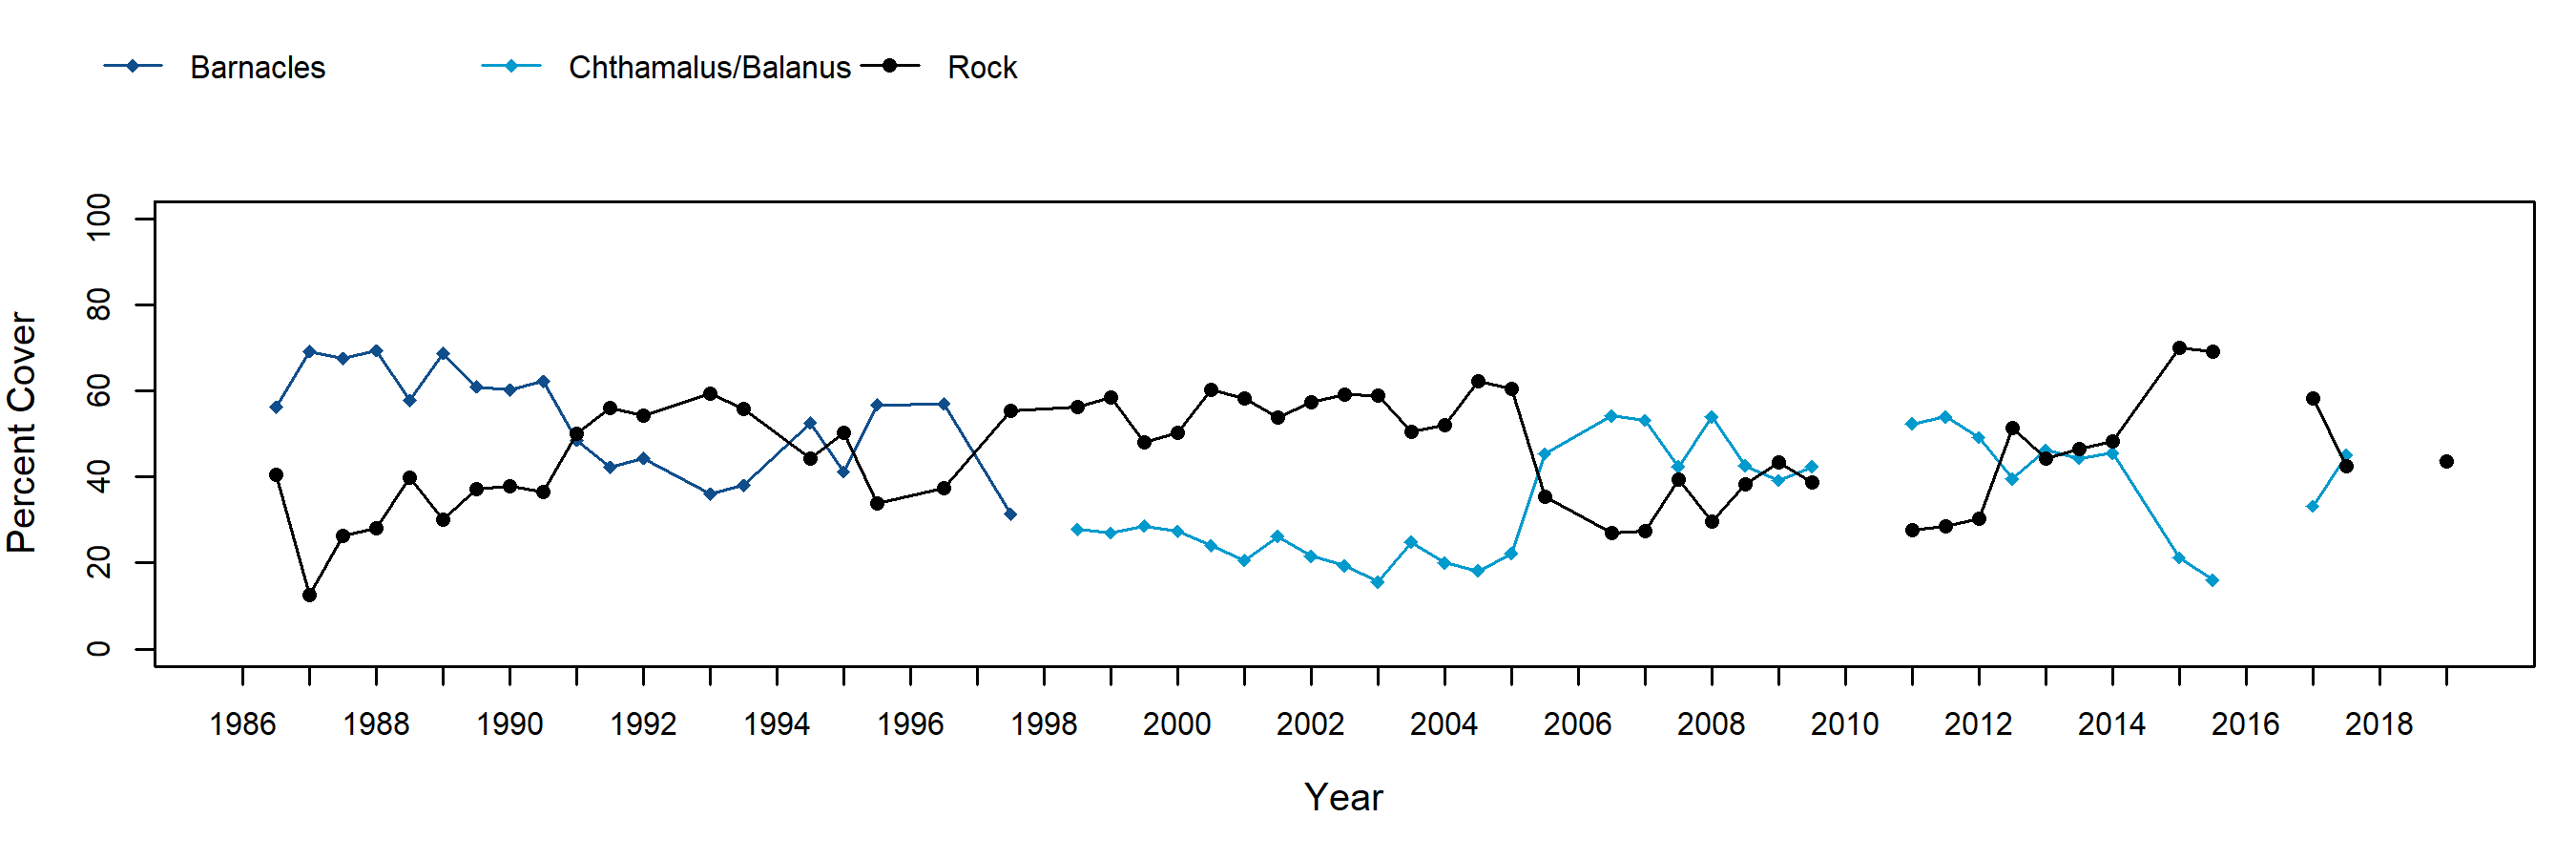 East Point barnacle trend plot